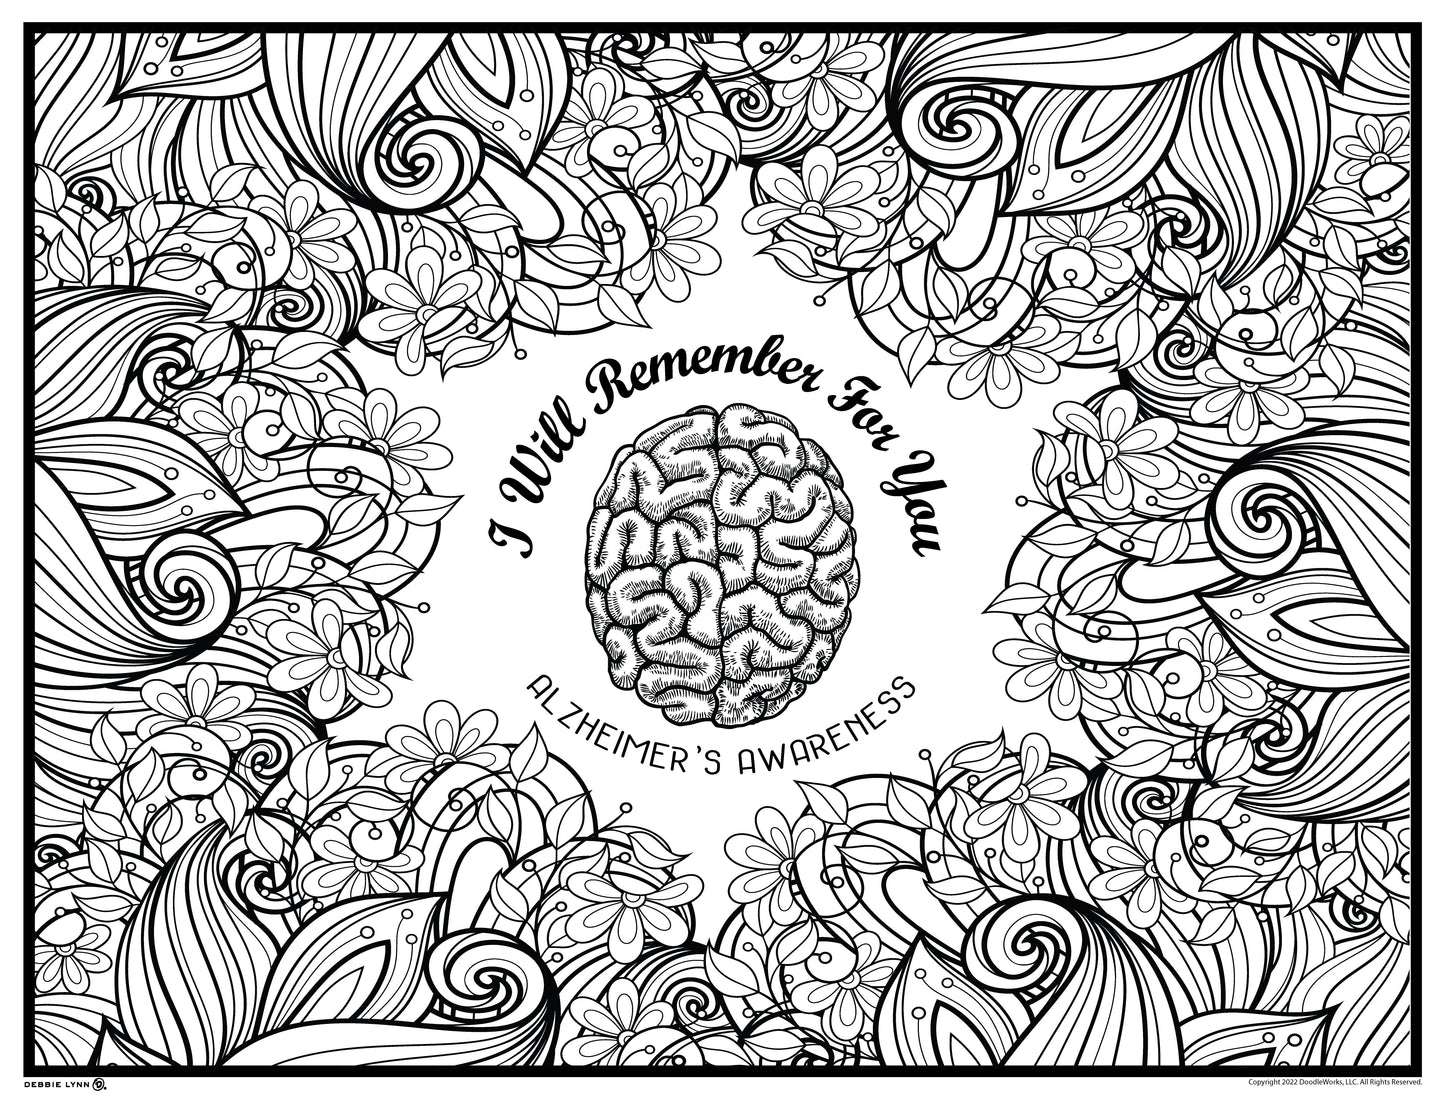 Alzheimer's Awareness Personalized Giant Coloring Poster